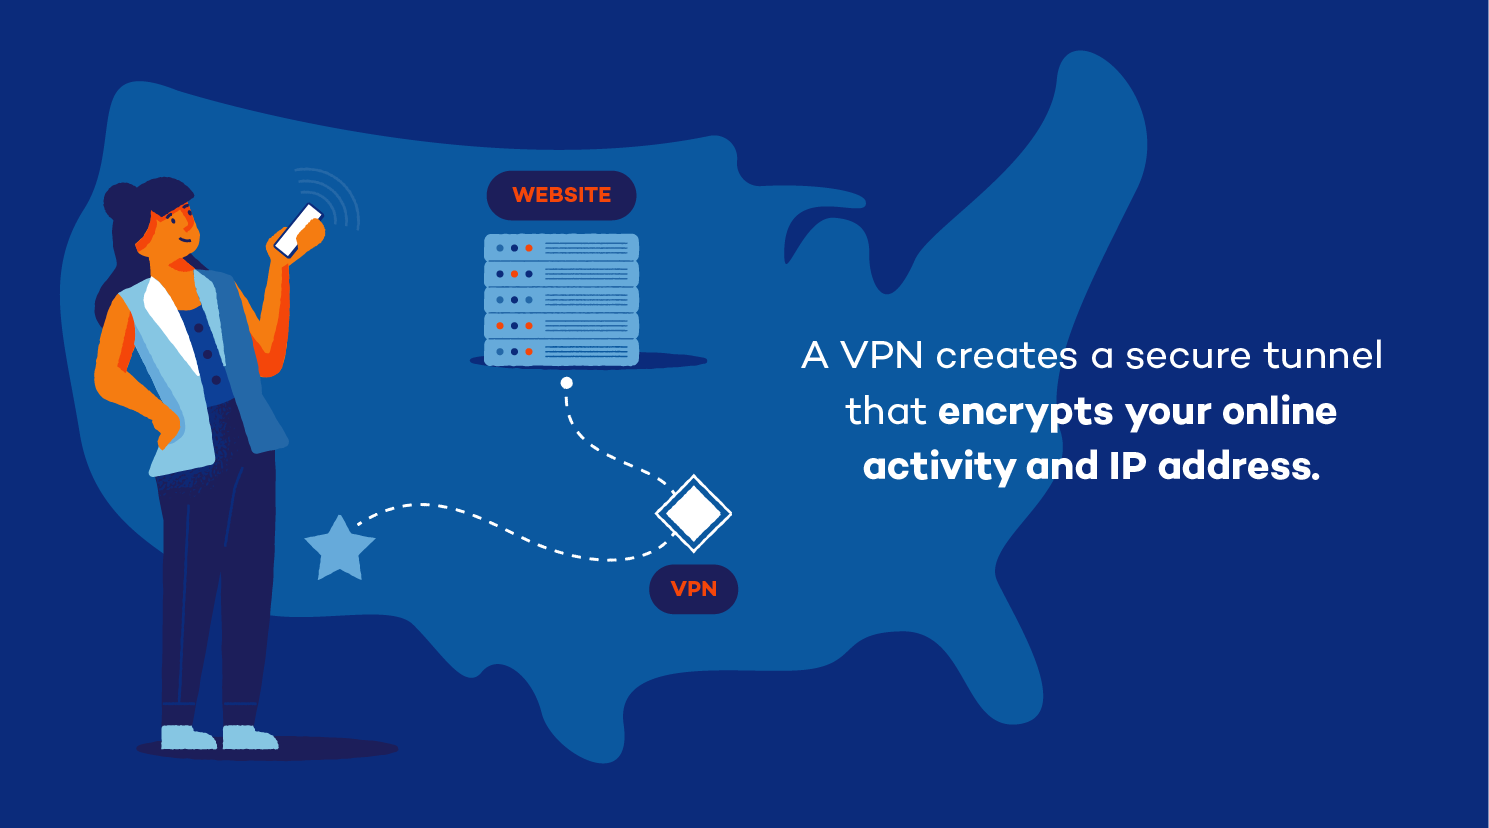 Illustration with the following text: "A VPN creates a secure tunnel that encrypts your online activity and IP address.